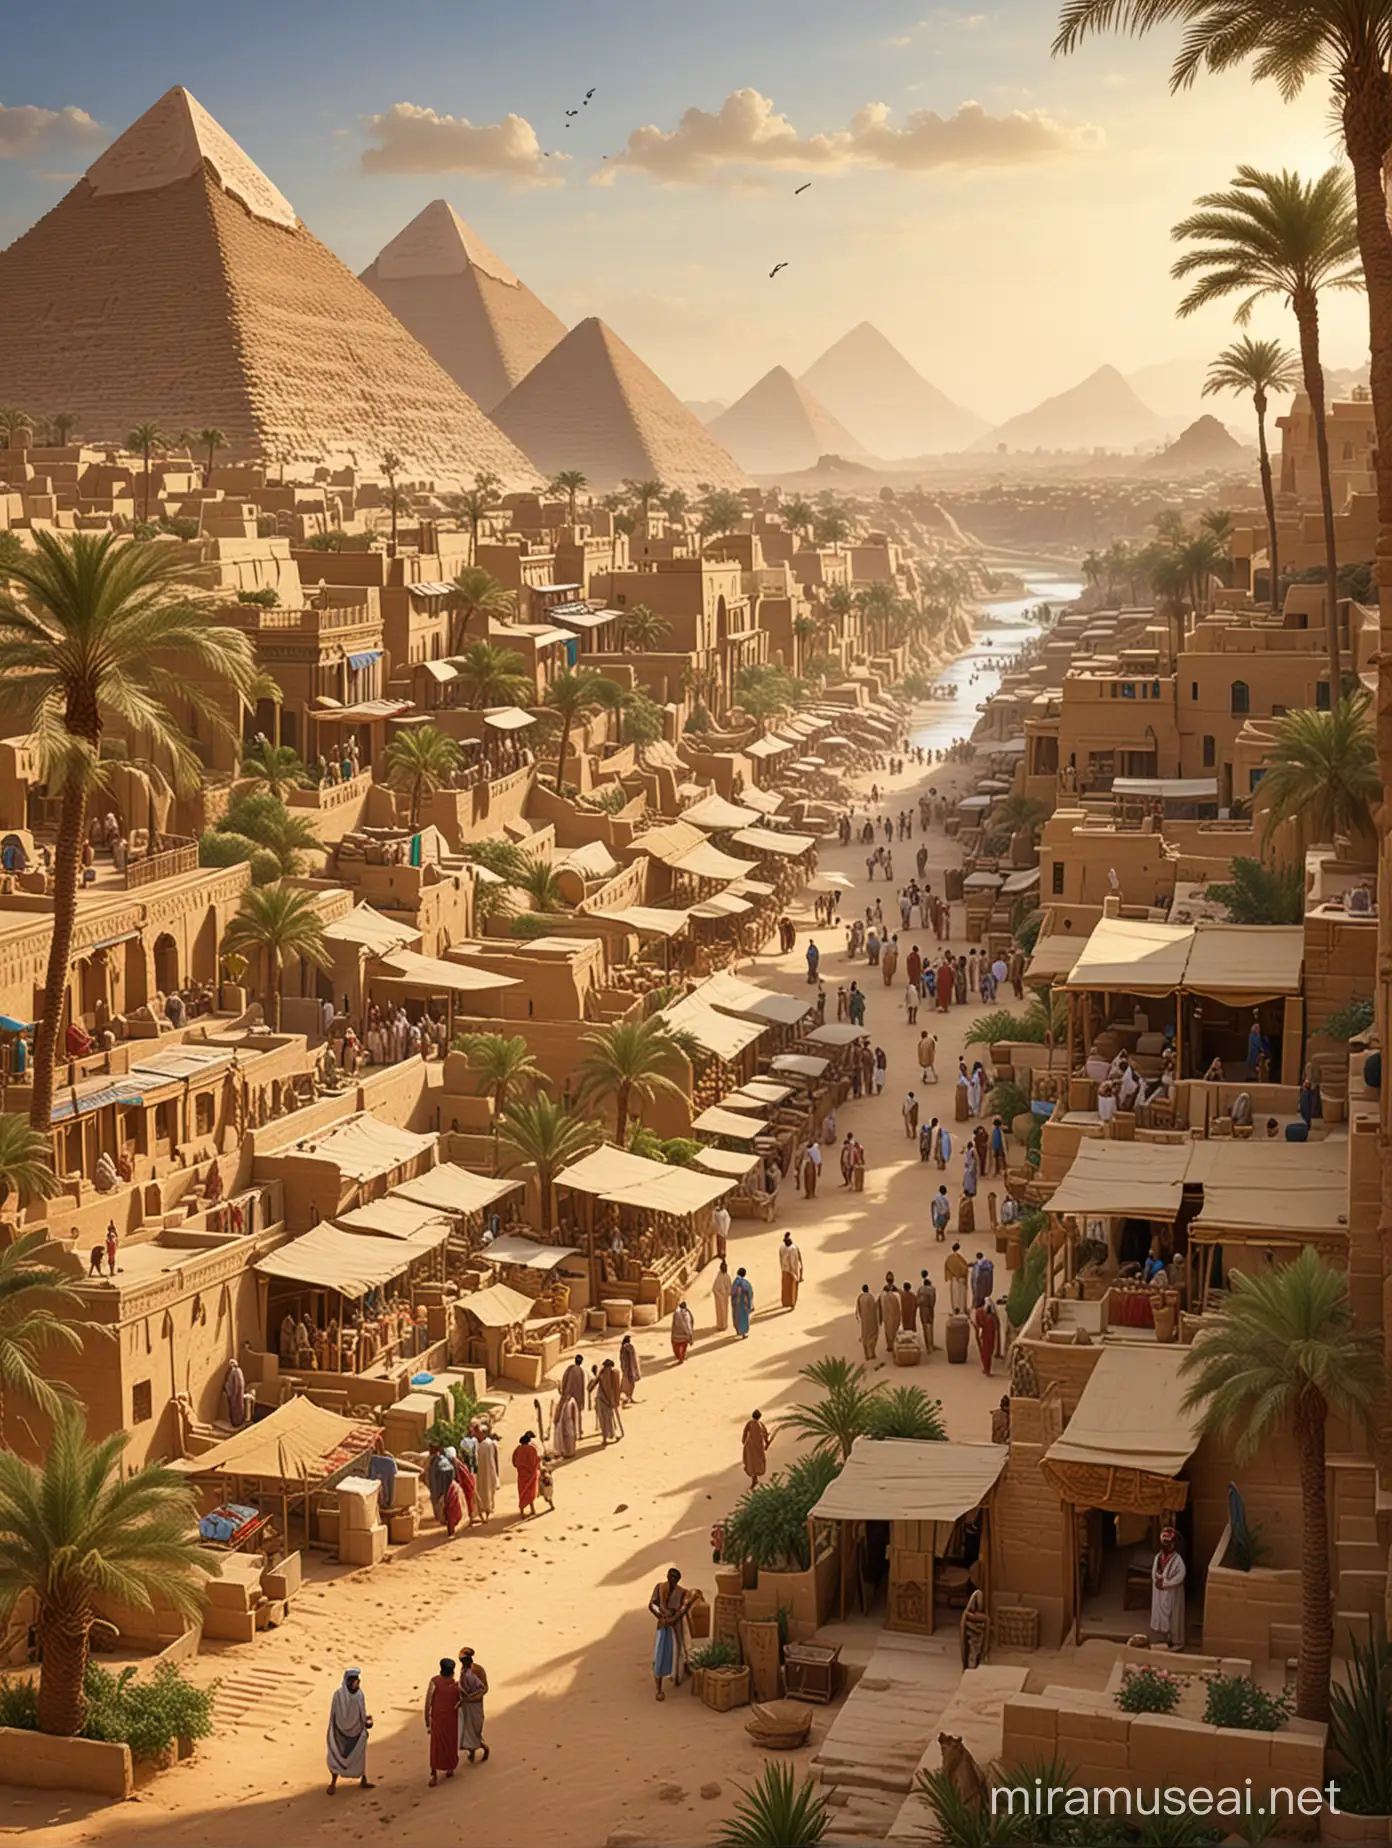 Generate an illustration capturing the vibrant life and grandeur of ancient Egyptian civilization during the BC era. Depict the iconic landscape of the Nile River valley with lush greenery and fertile farmland, contrasted against the golden sands of the surrounding desert. Show majestic pyramids rising towards the heavens, surrounded by bustling cities and bustling marketplaces. Include scenes of daily life, with farmers tending to their crops along the riverbanks, craftsmen honing their skills in workshops, and priests conducting rituals in temple courtyards. Ensure accuracy in depicting traditional Egyptian attire, architecture, and cultural elements such as hieroglyphics and religious symbolism, to authentically convey the rich history and heritage of this ancient society."